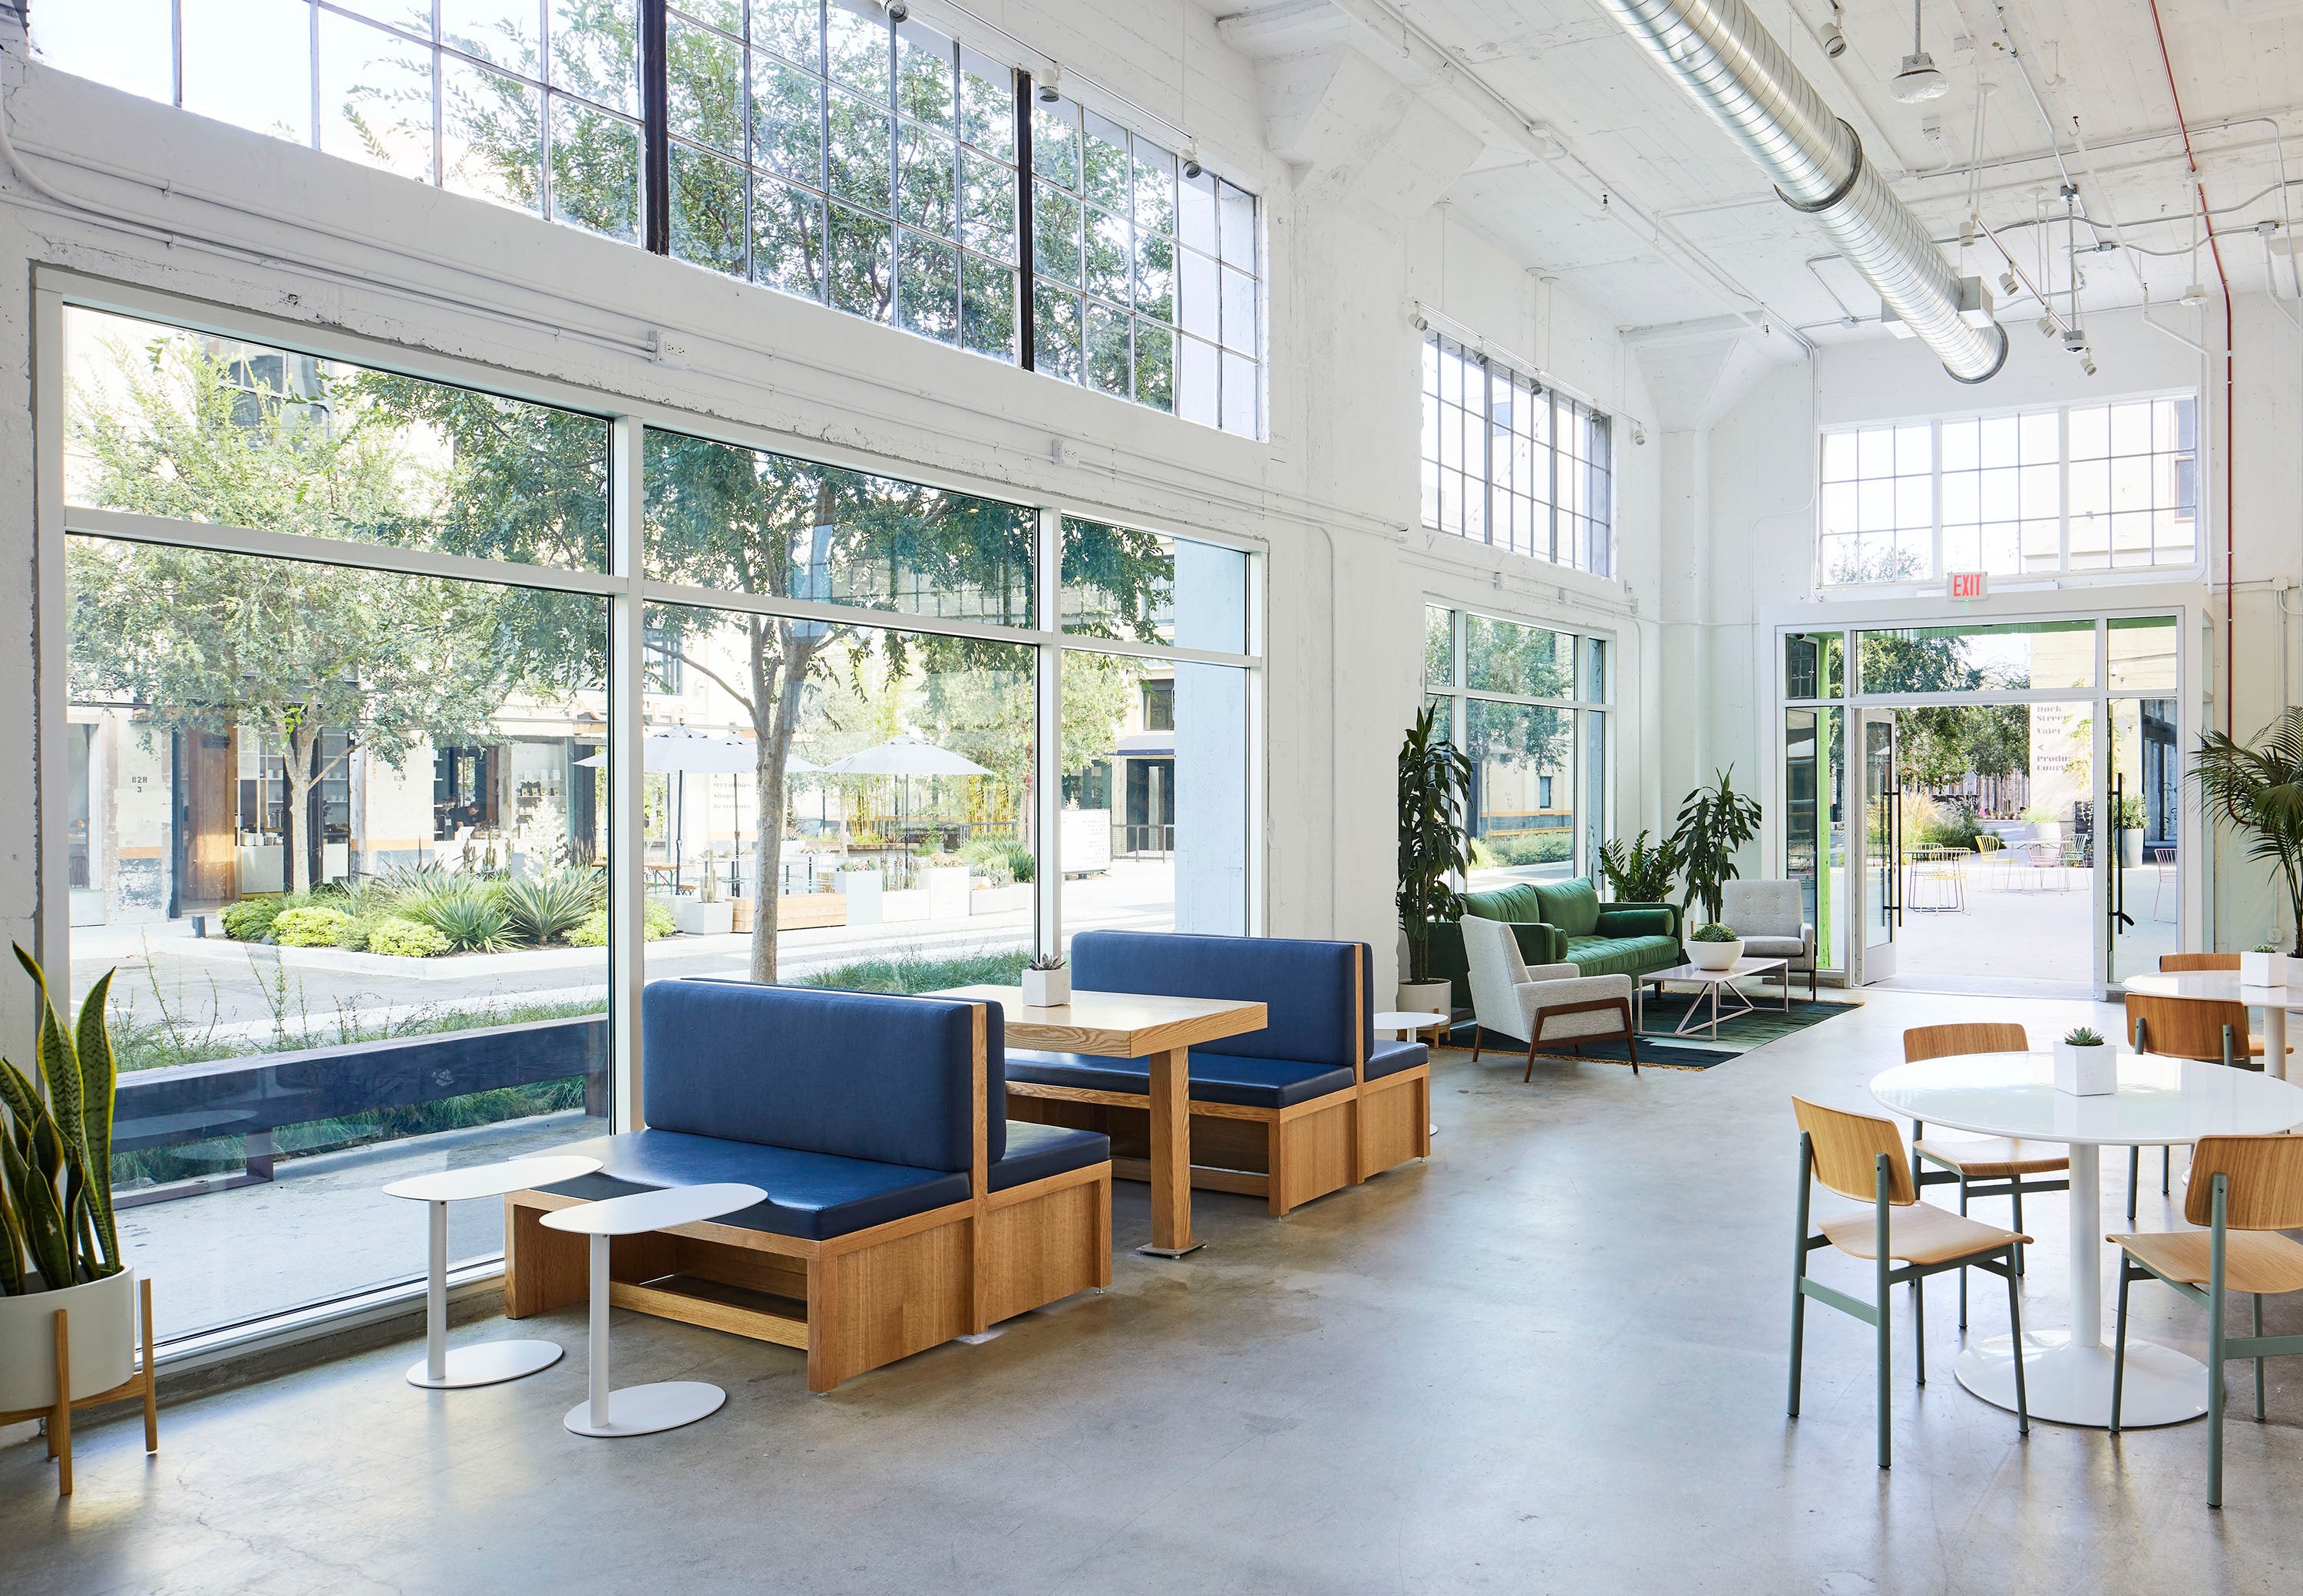 Shopify in LA coworking space